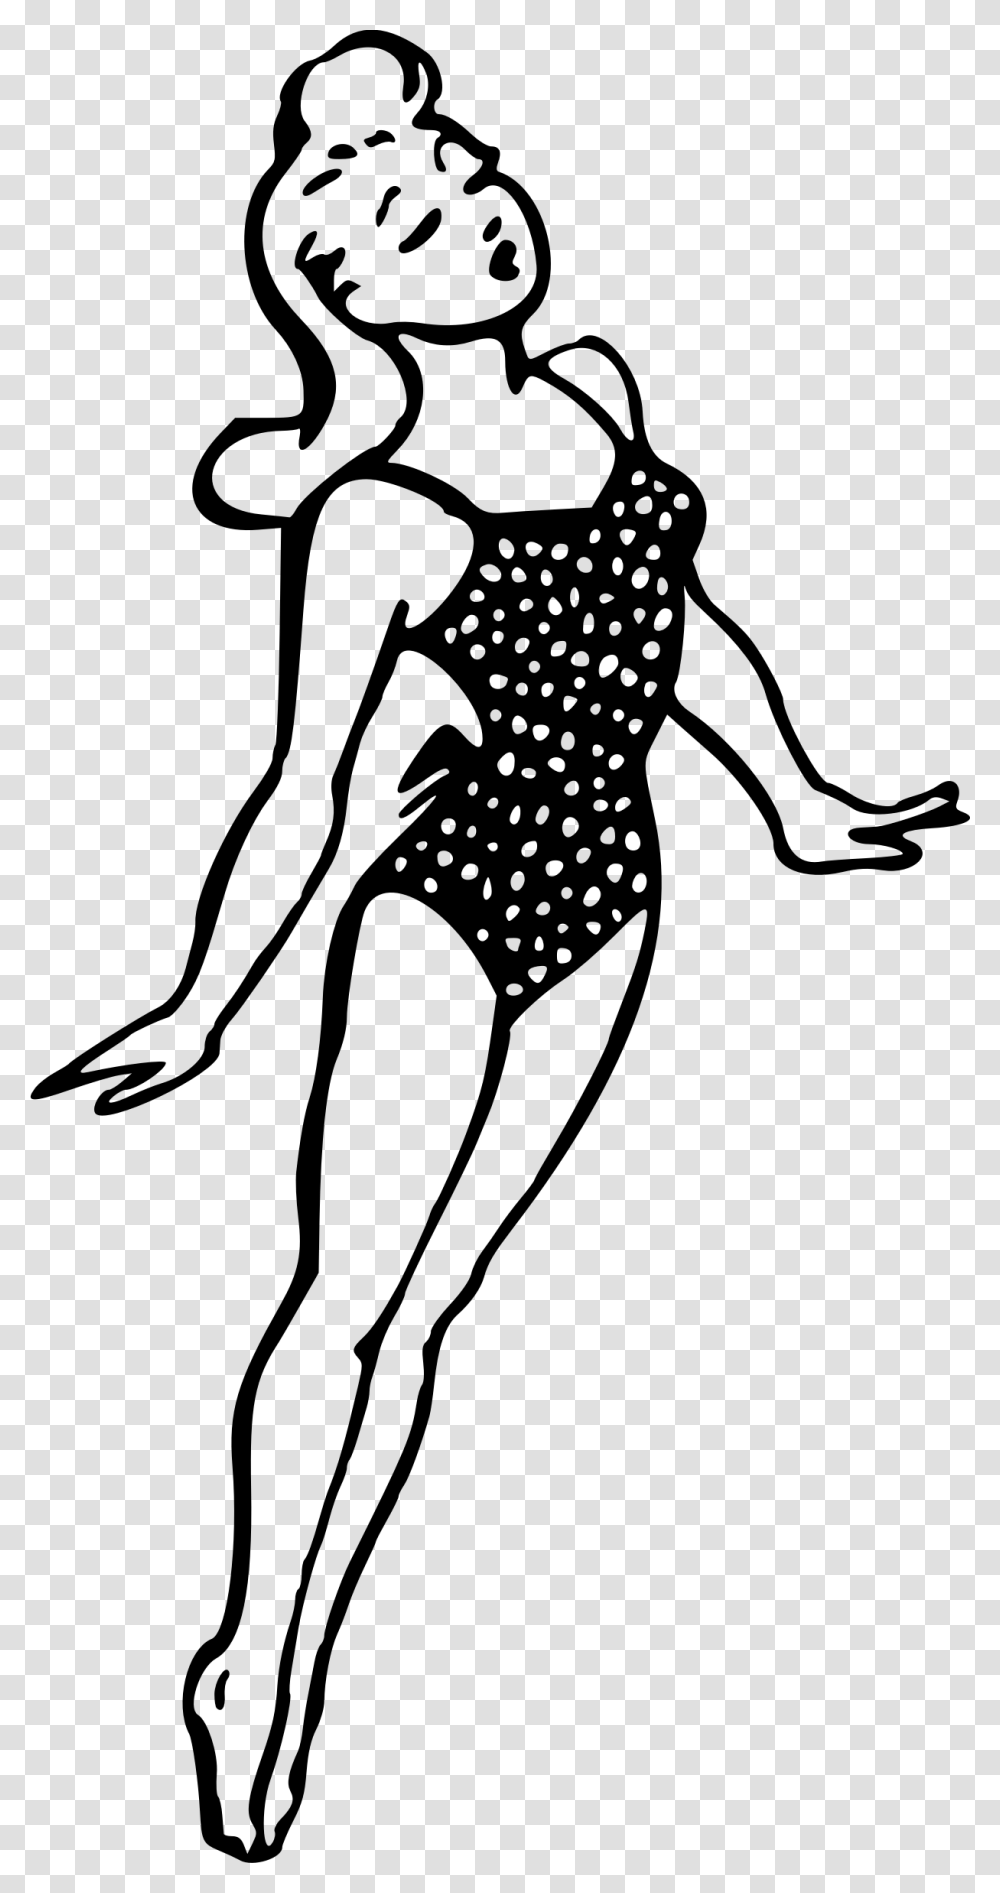 This Free Icons Design Of Lady In Swimsuit Lady In Swimsuit Clipart, Gray, World Of Warcraft Transparent Png